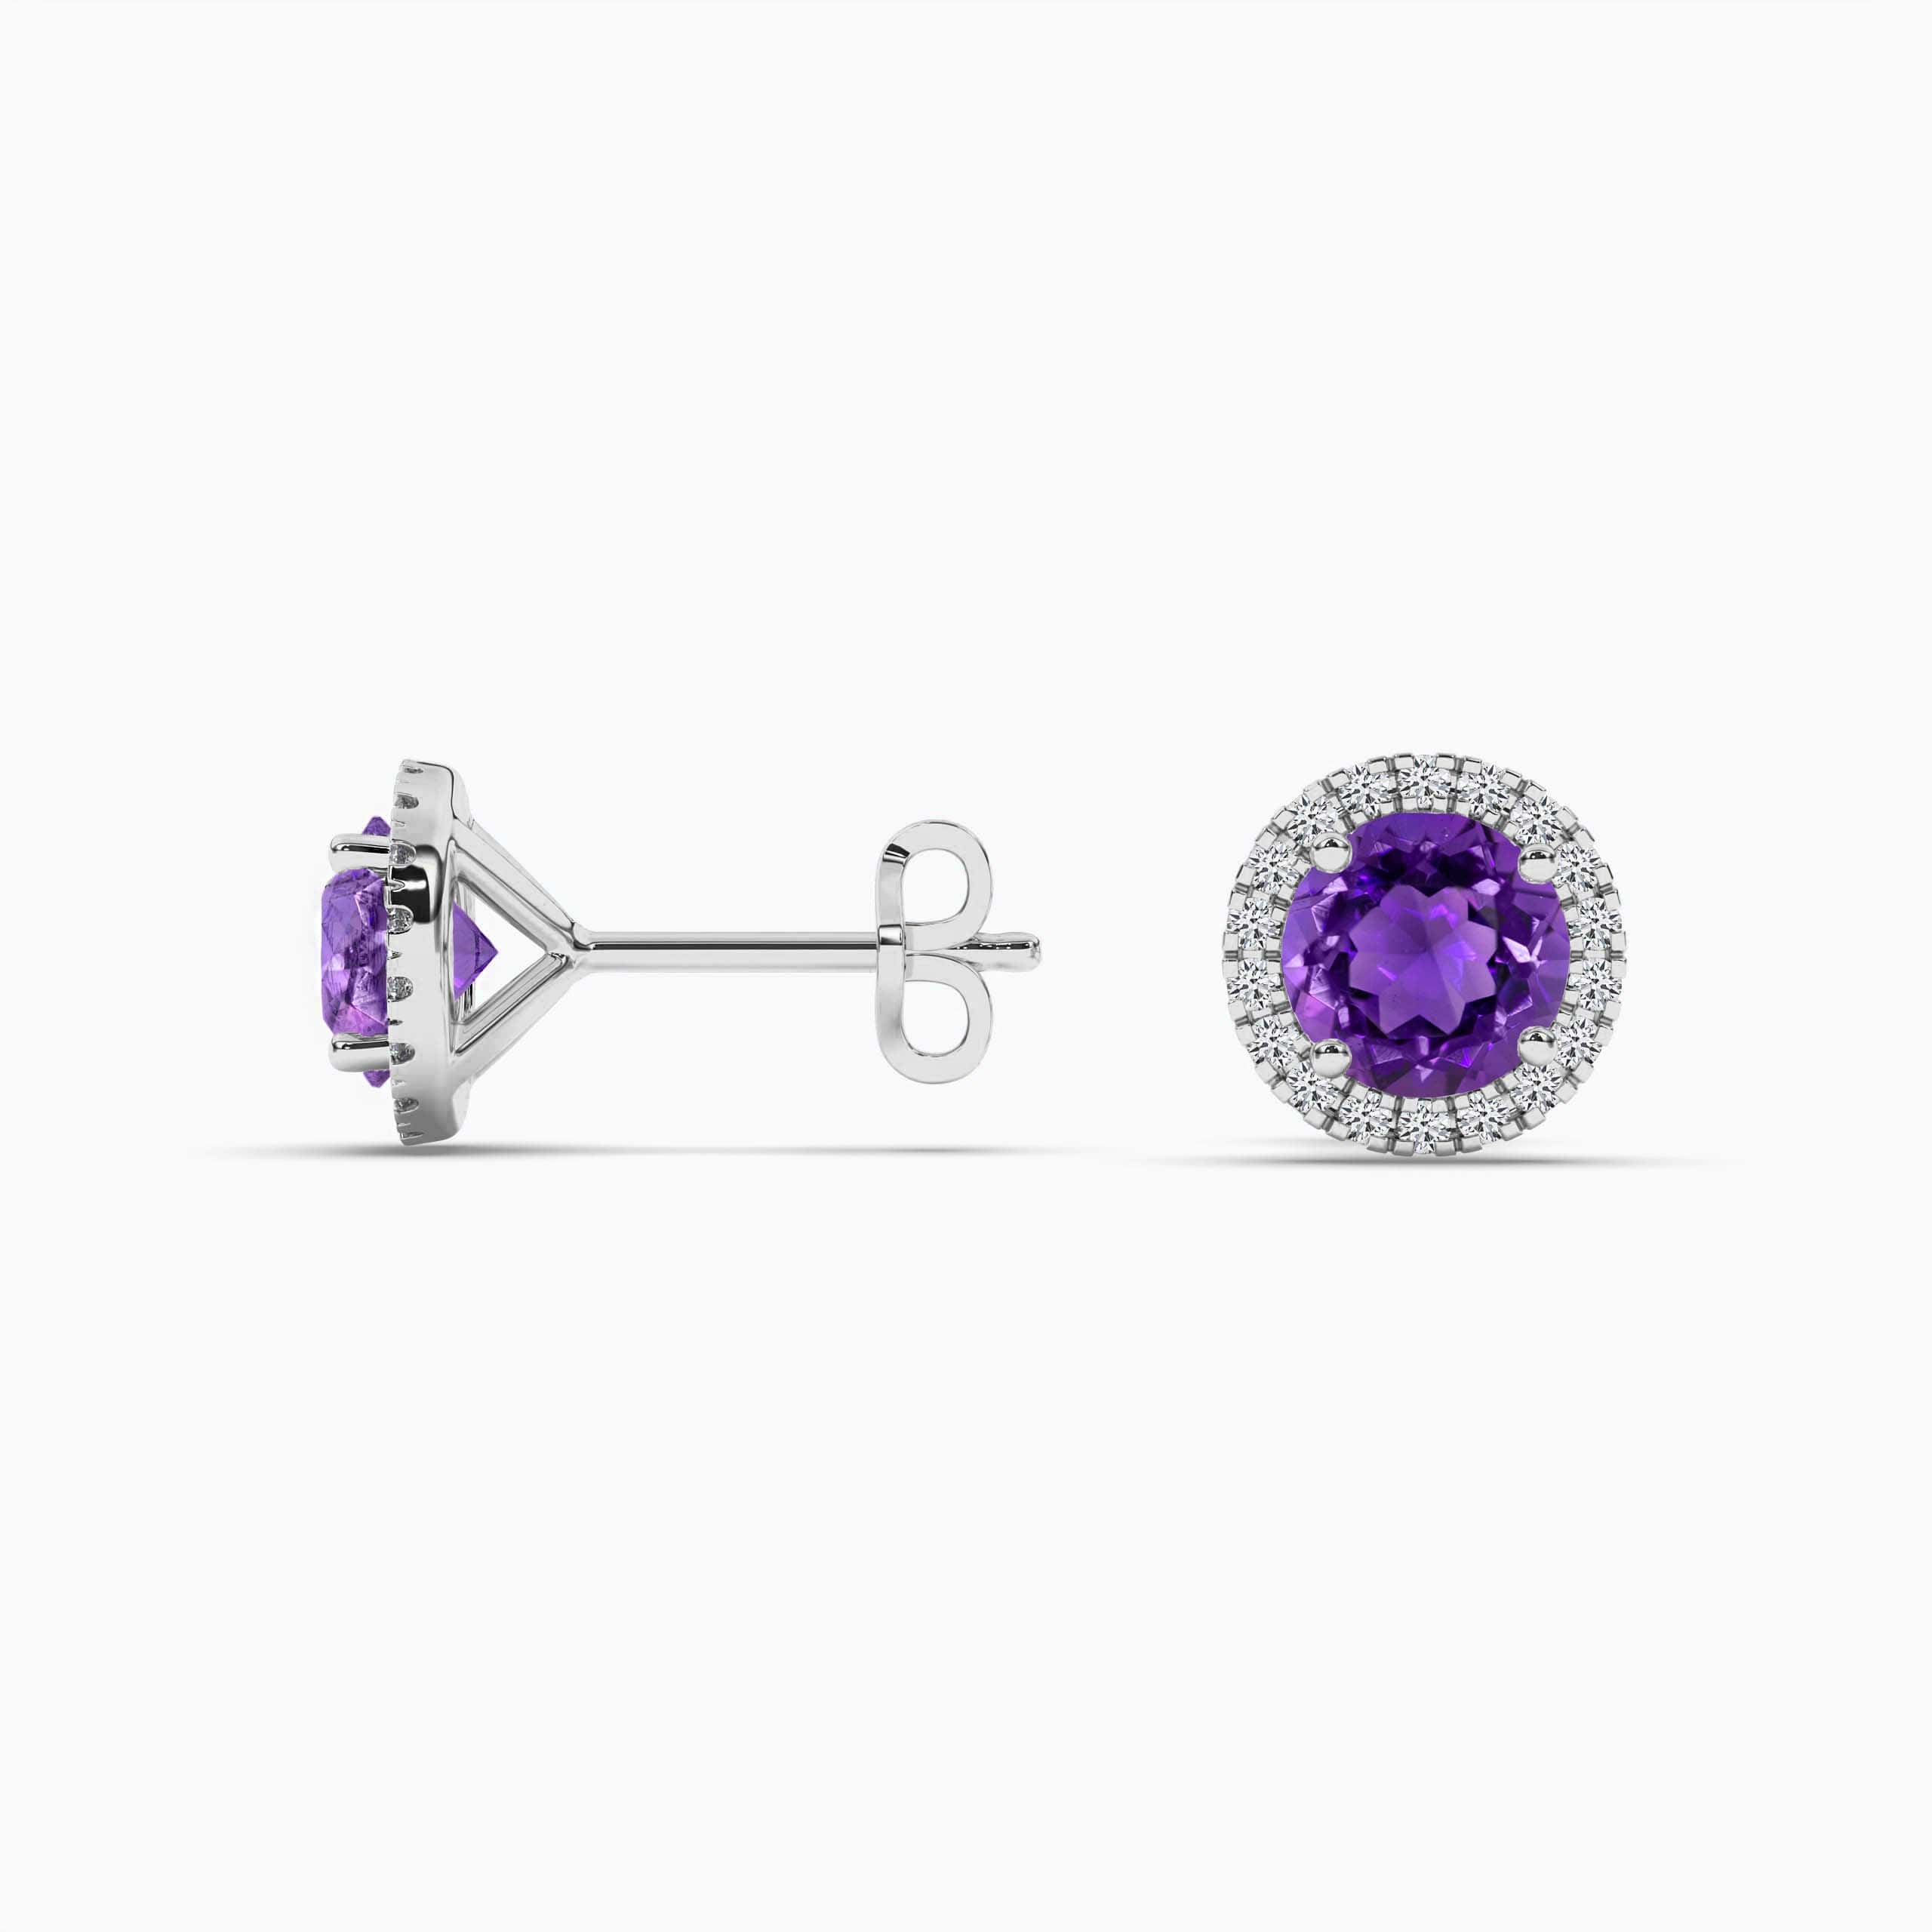 White Gold Round Amethyst and Diamond Halo Stud Earrings